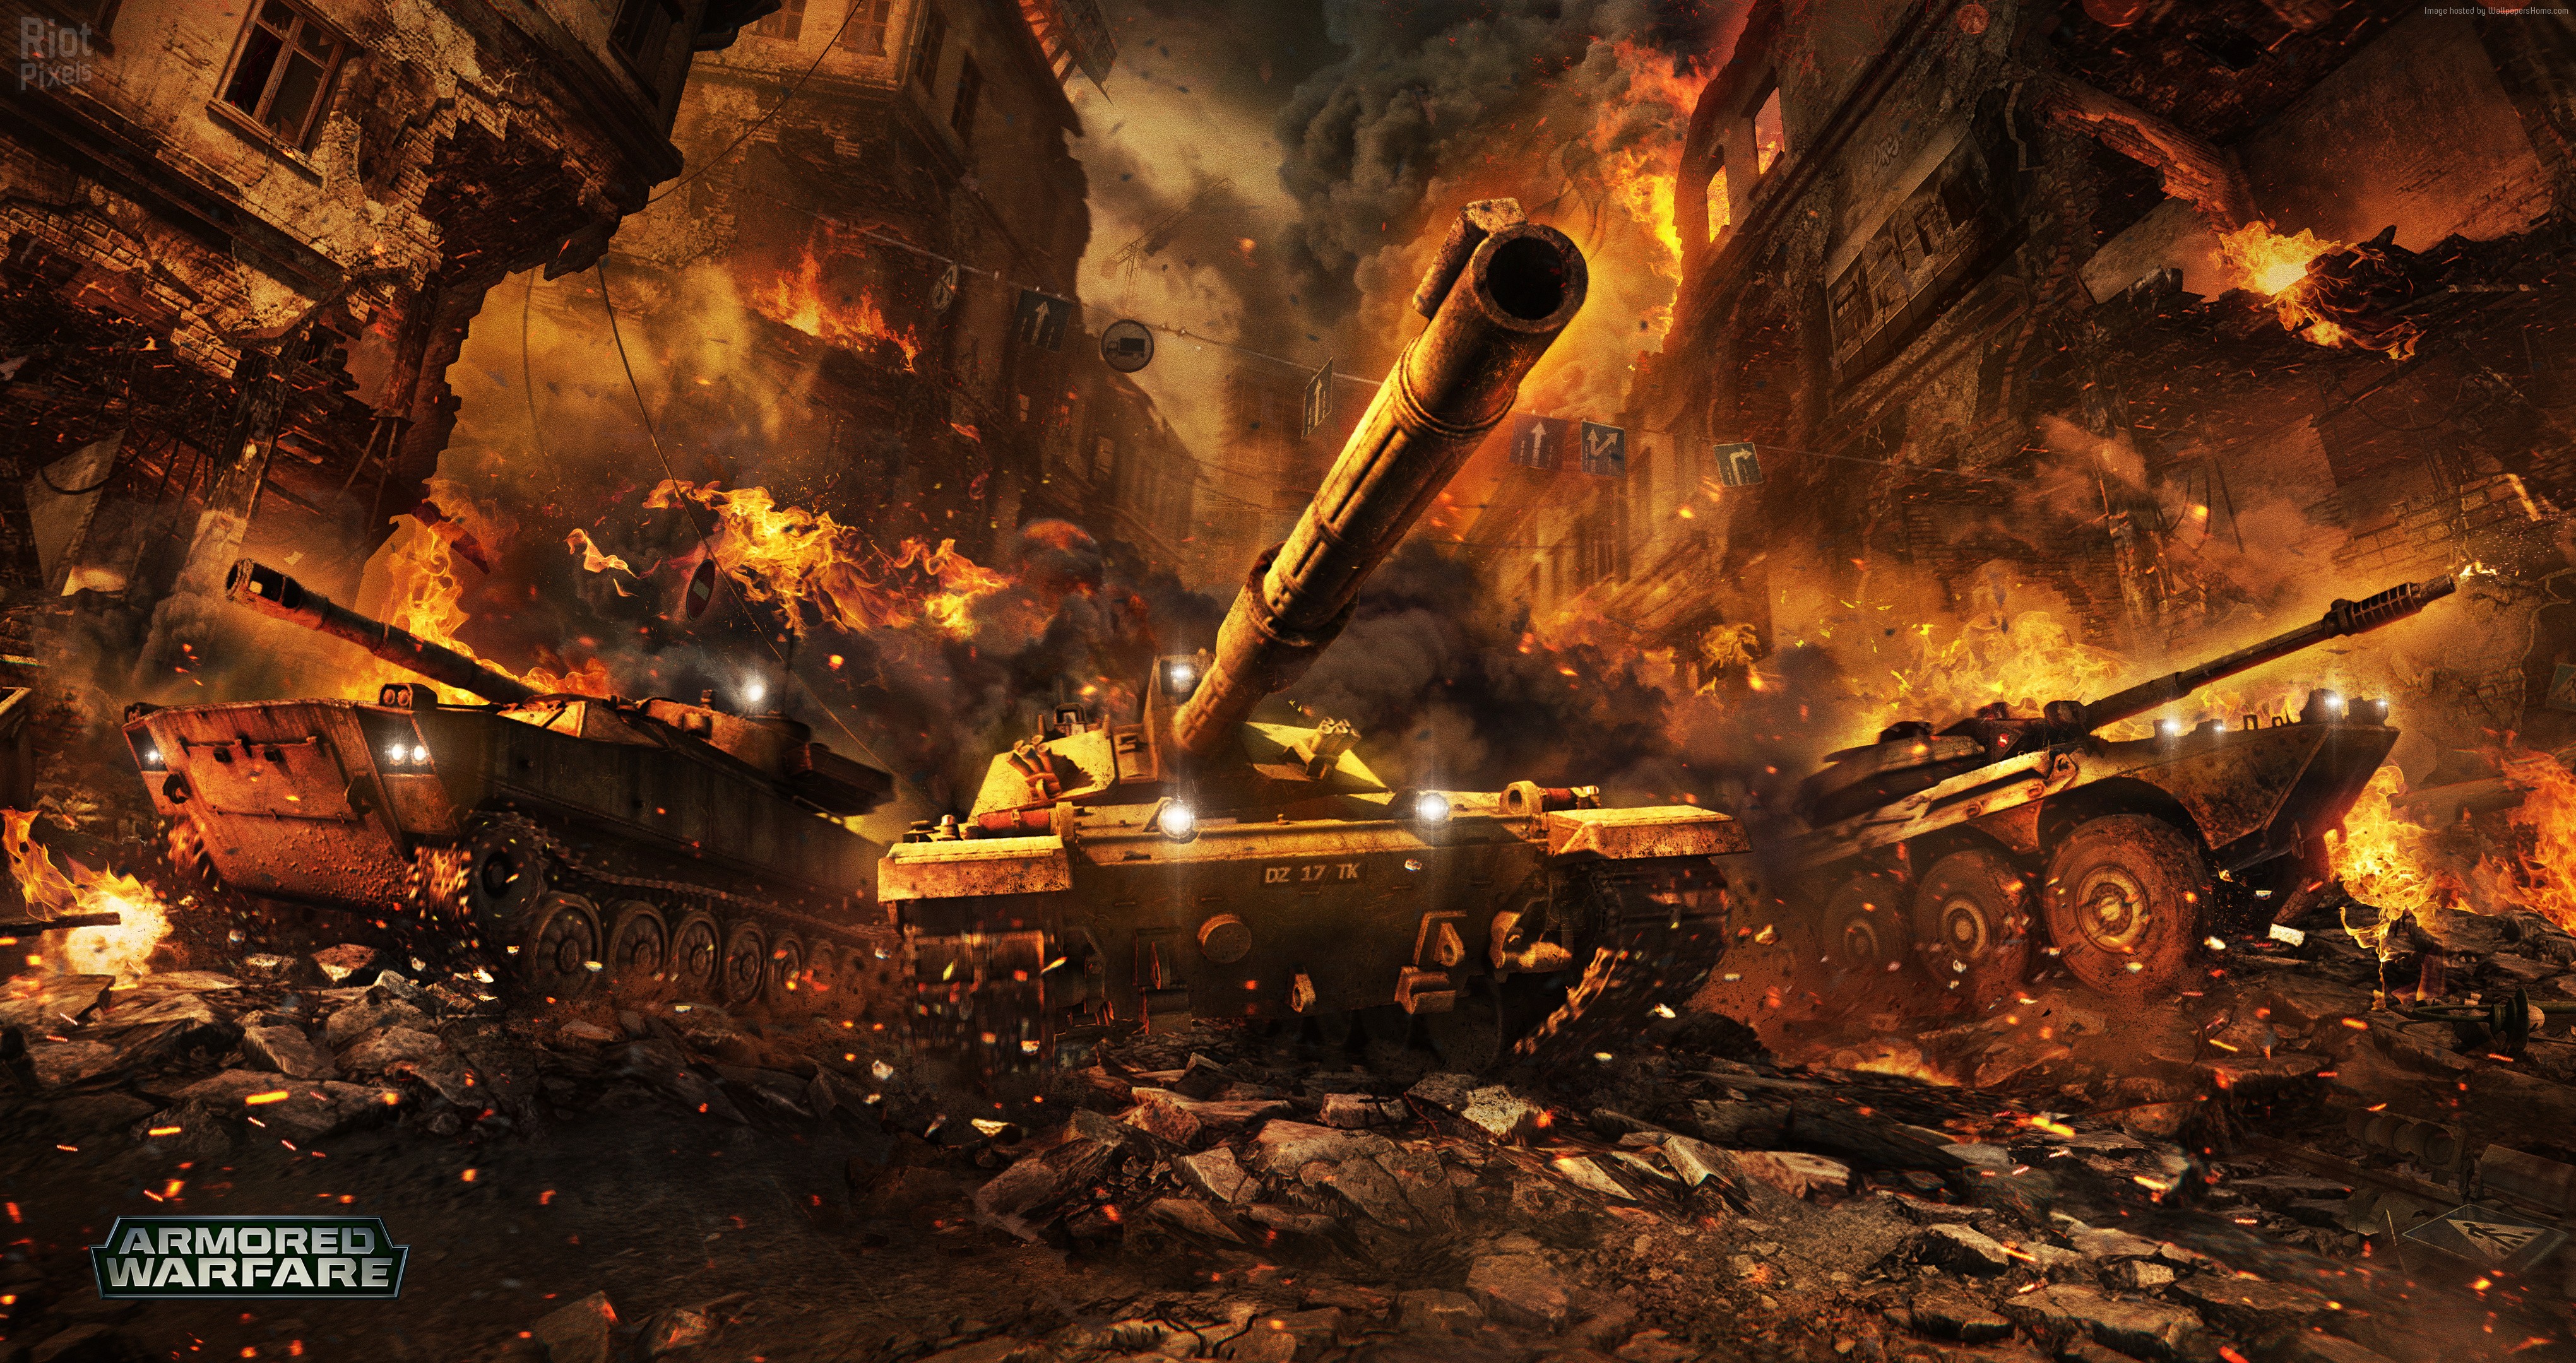 Armored Warfare Wallpaper Games Action Game Mmo